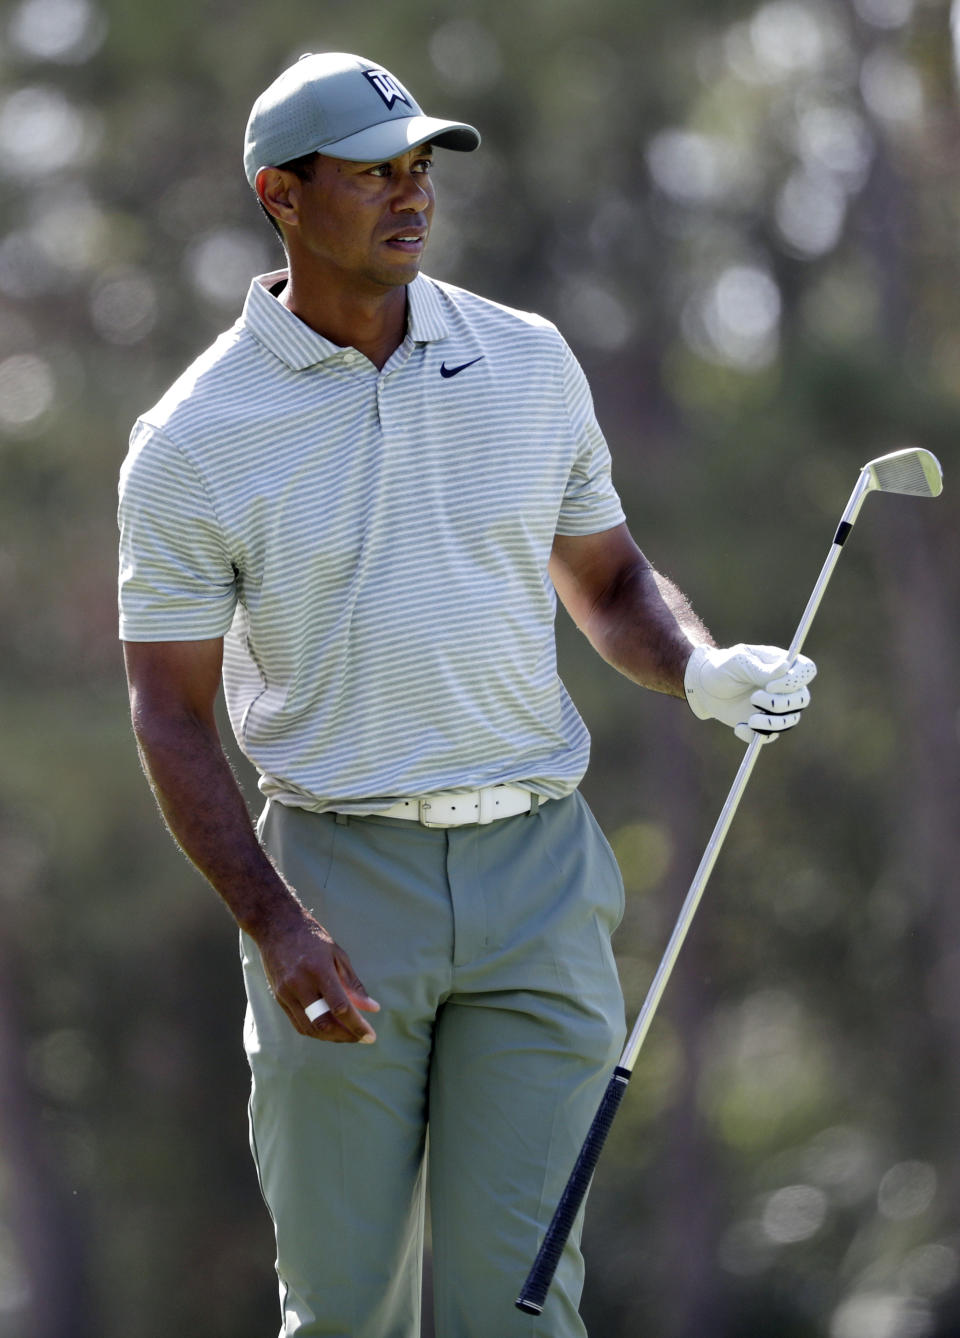 Tiger Woods watches his shot from the 10th fairway during the first round of The Players Championship golf tournament Thursday, March 14, 2019, in Ponte Vedra Beach, Fla. (AP Photo/Lynne Sladky)